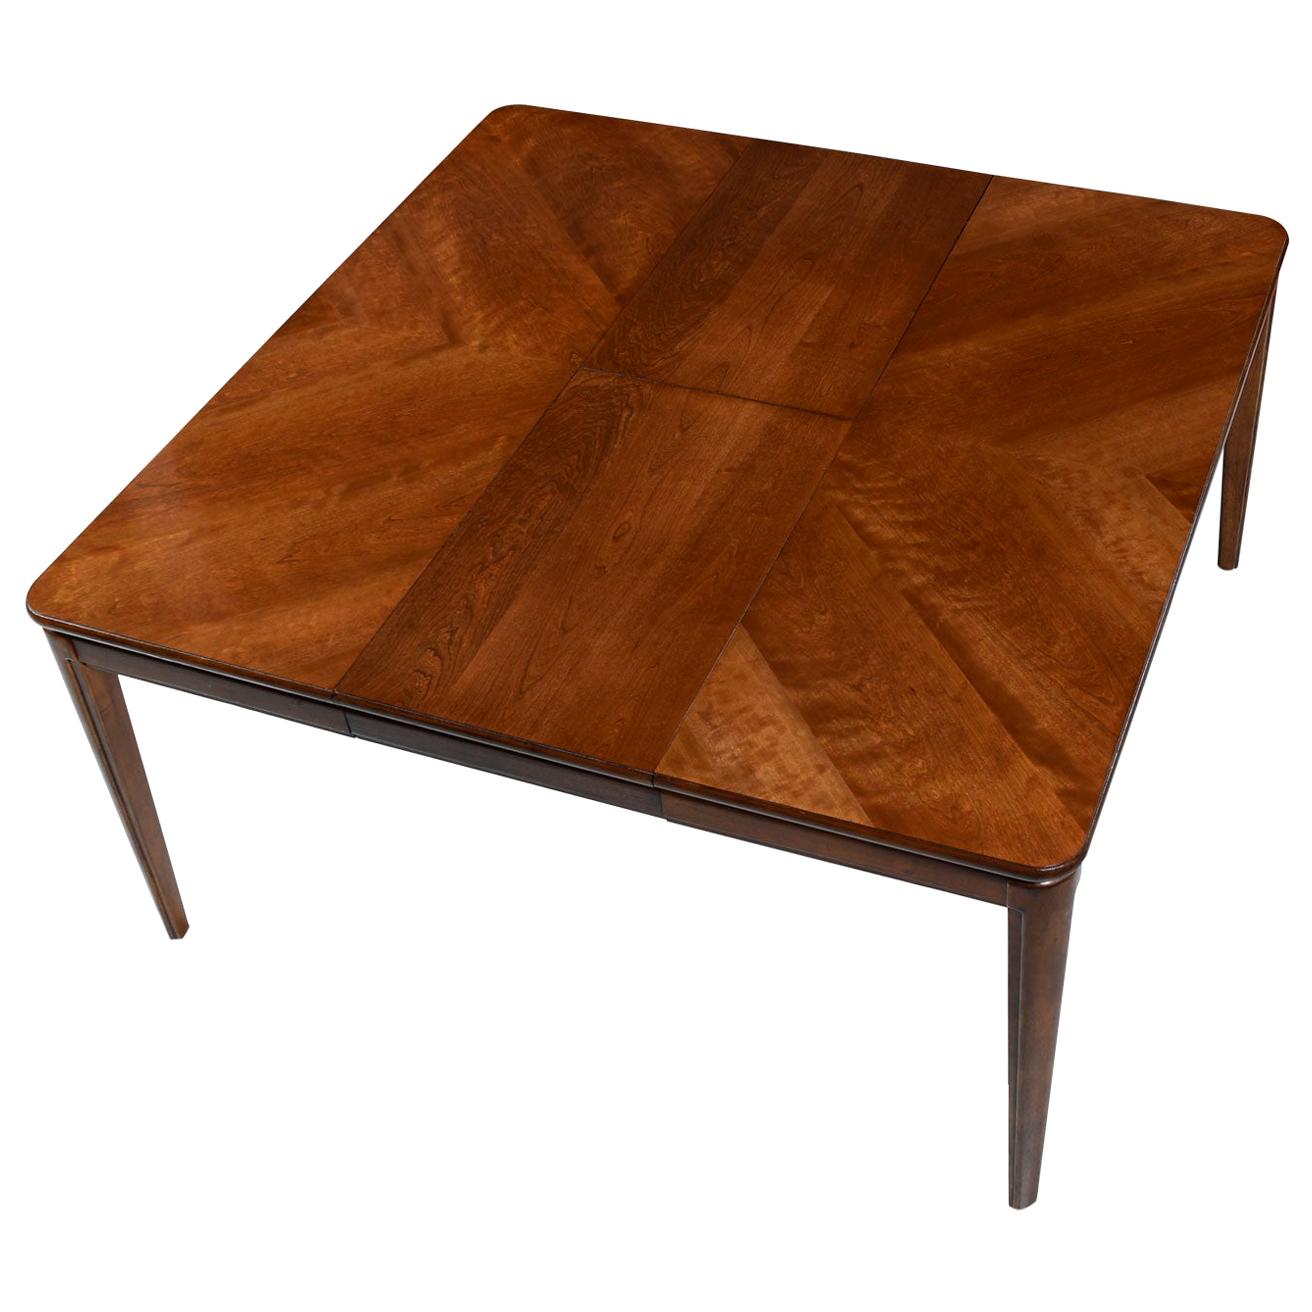 This marvel of a table is a rectangular shape when compact. Extend the butterfly leaf to create a large square shape! Easily seat eight or more guests at your new large, square table. The butterfly leaf folds at center and flips beneath the table